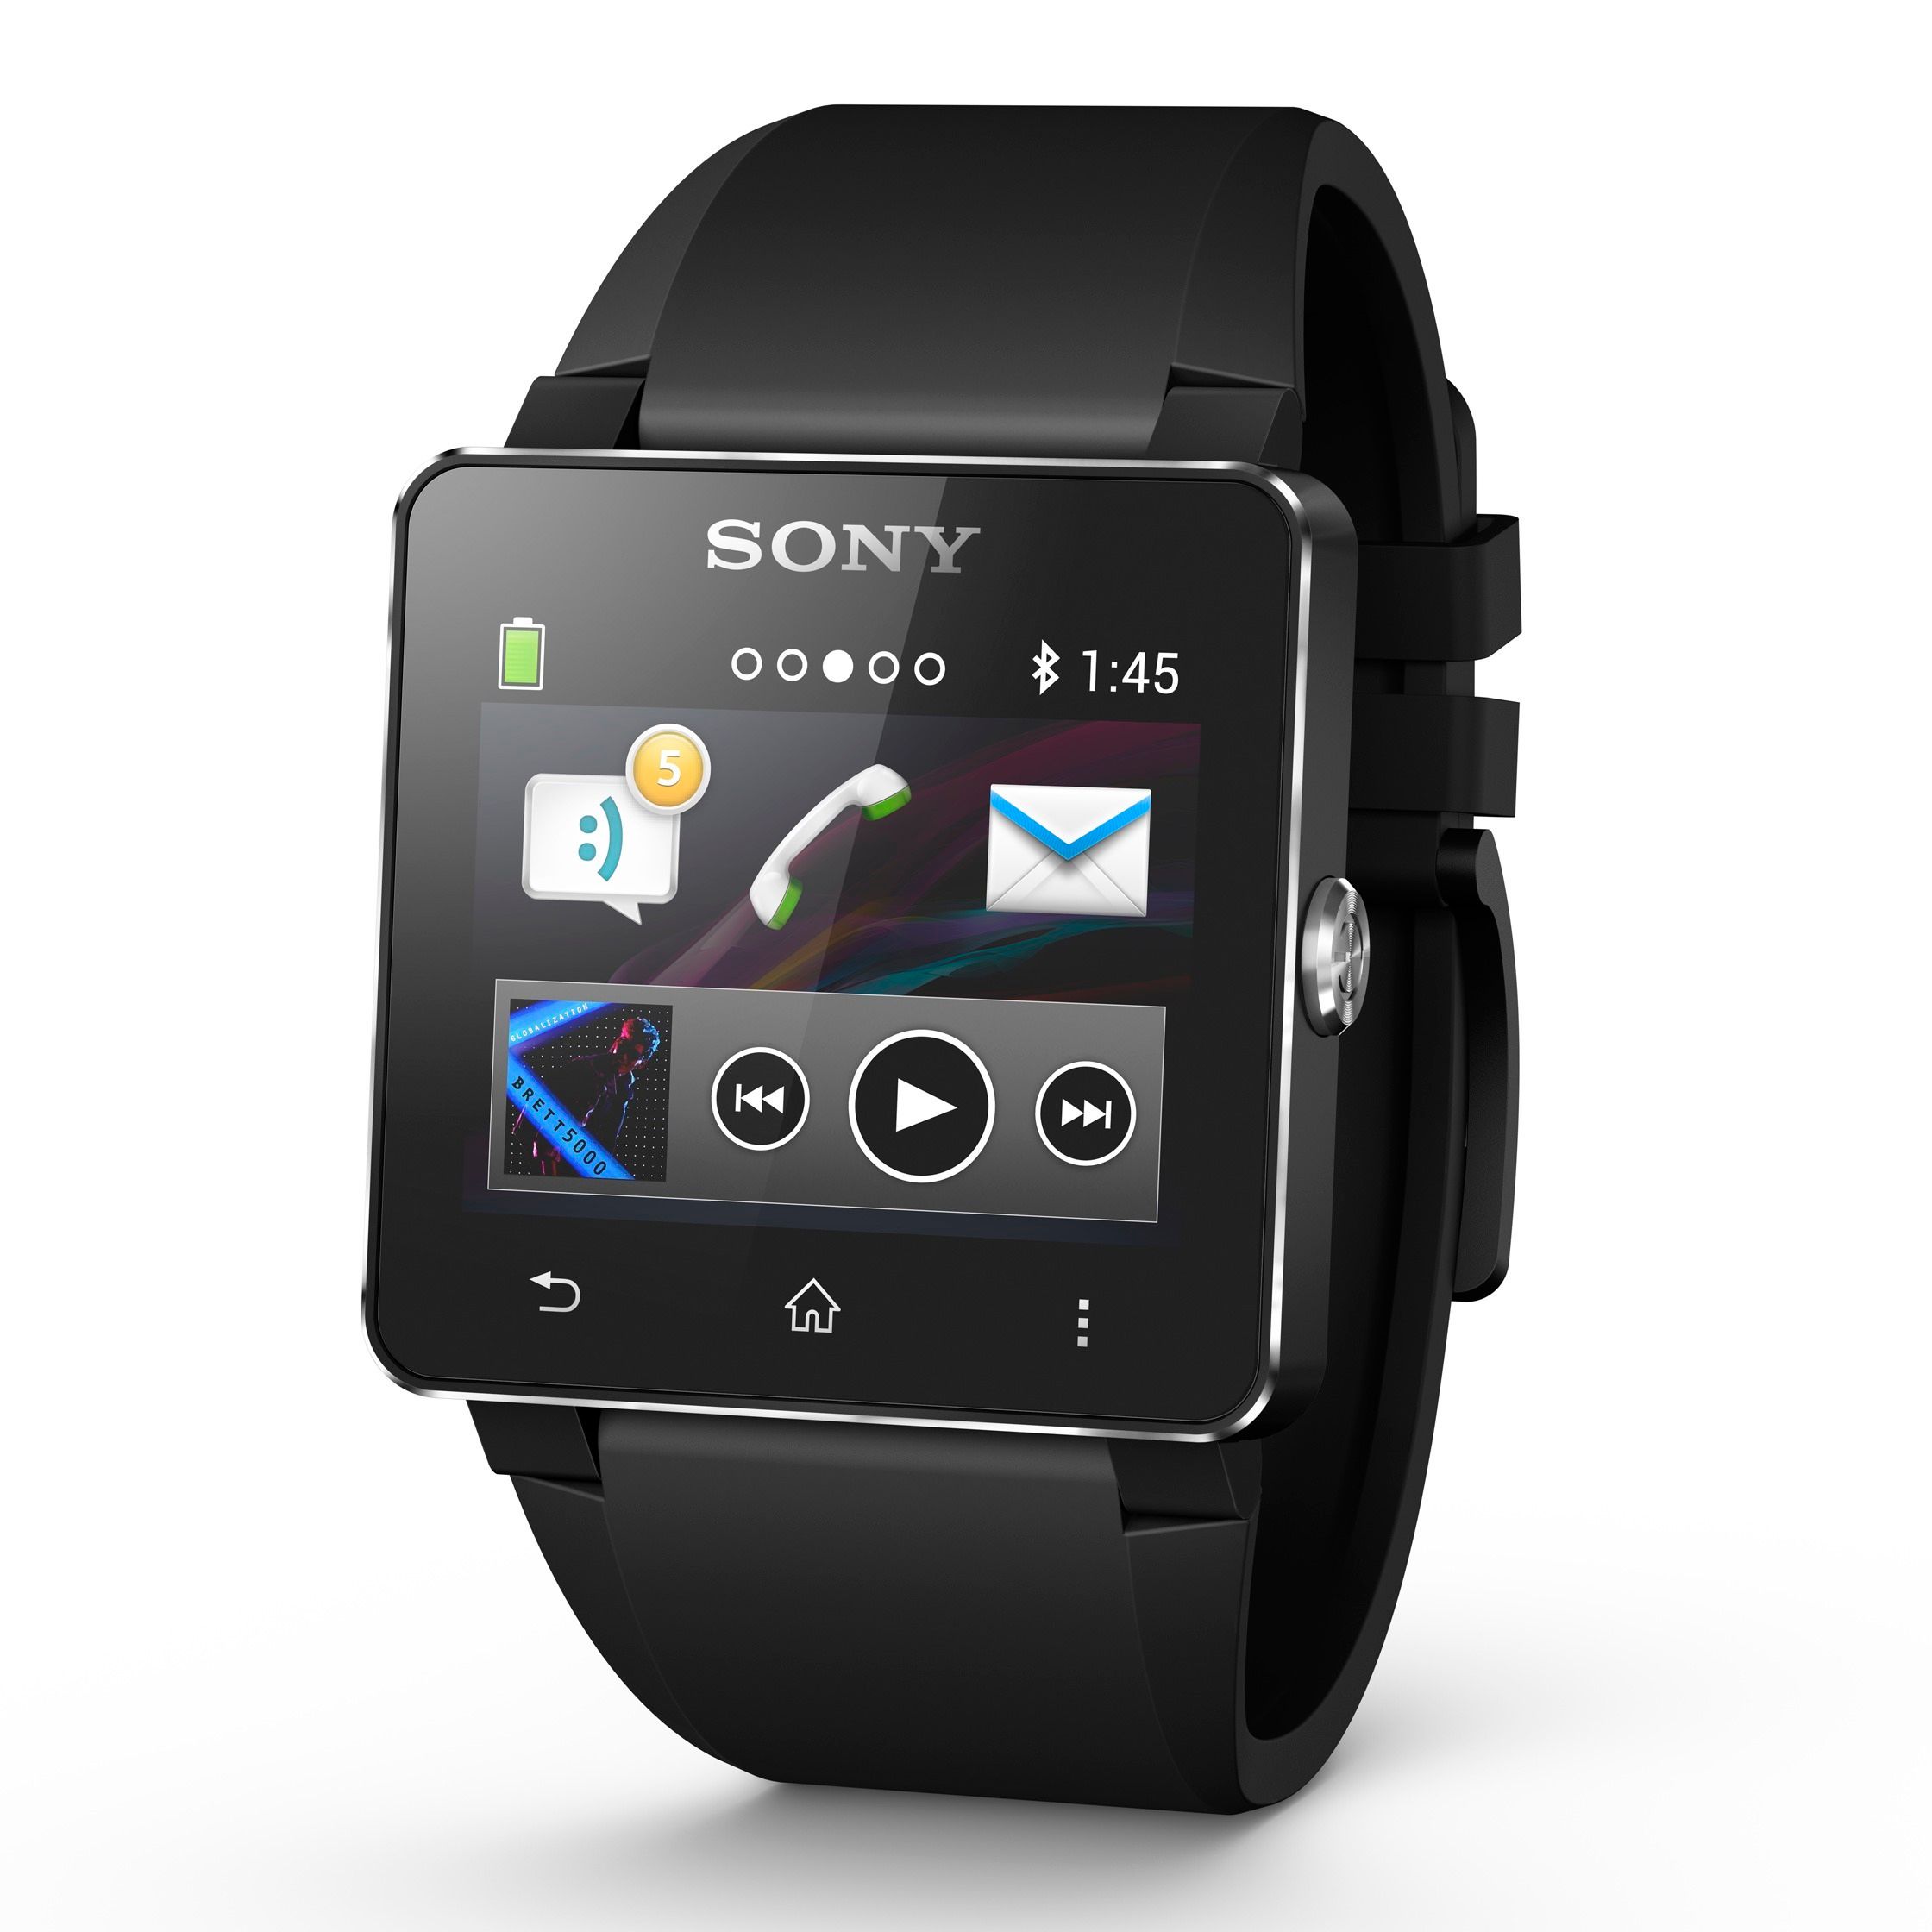 Sony Says It Will Continue Using Its Smart Watch Platform Instead ...